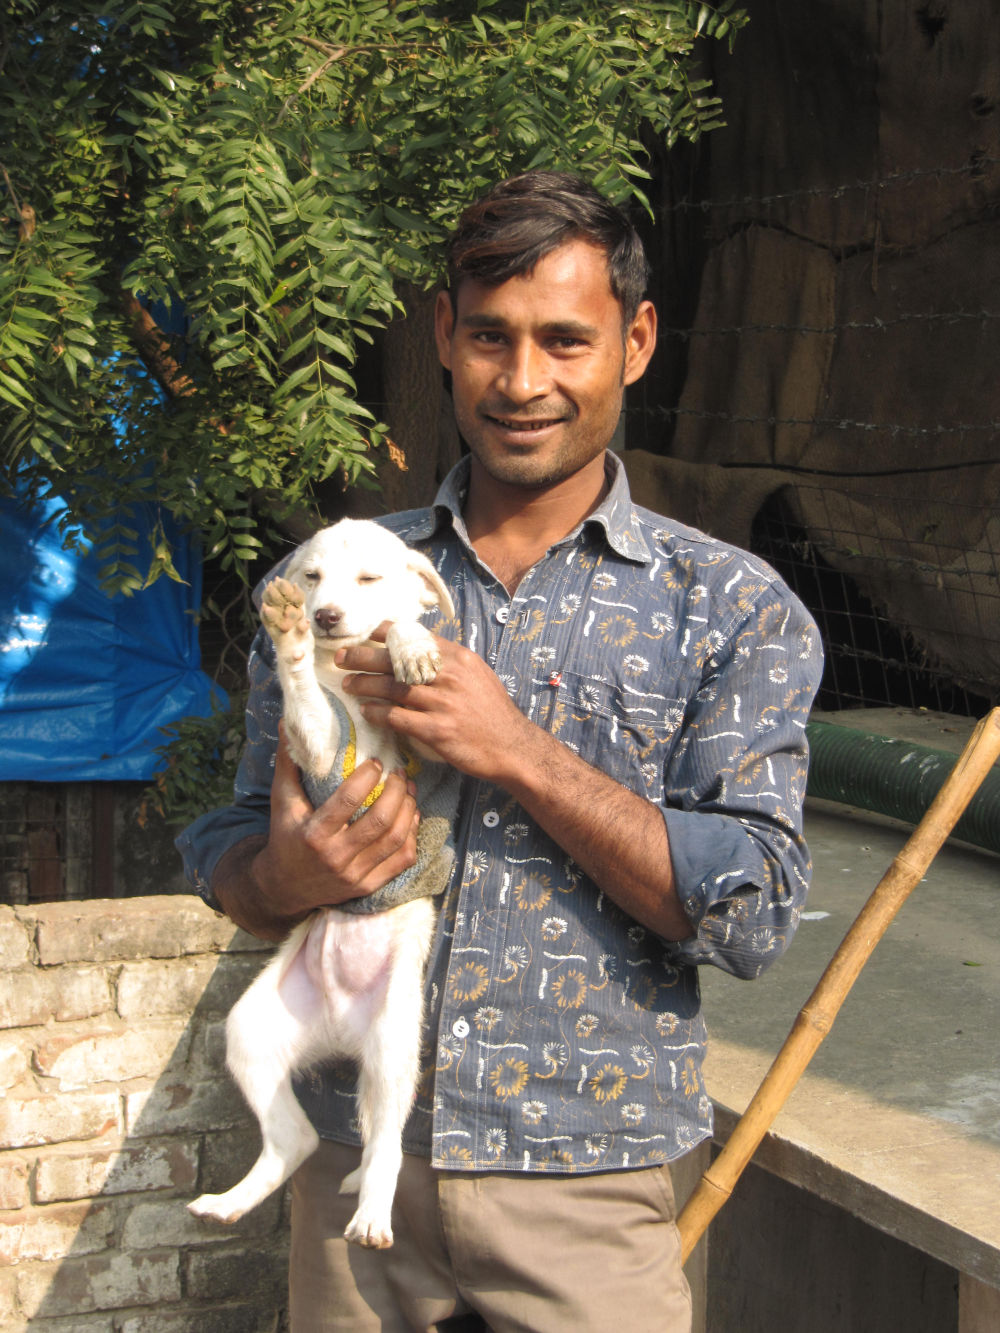 Join the World Animal Foundation and protect animals in India or elsewhere